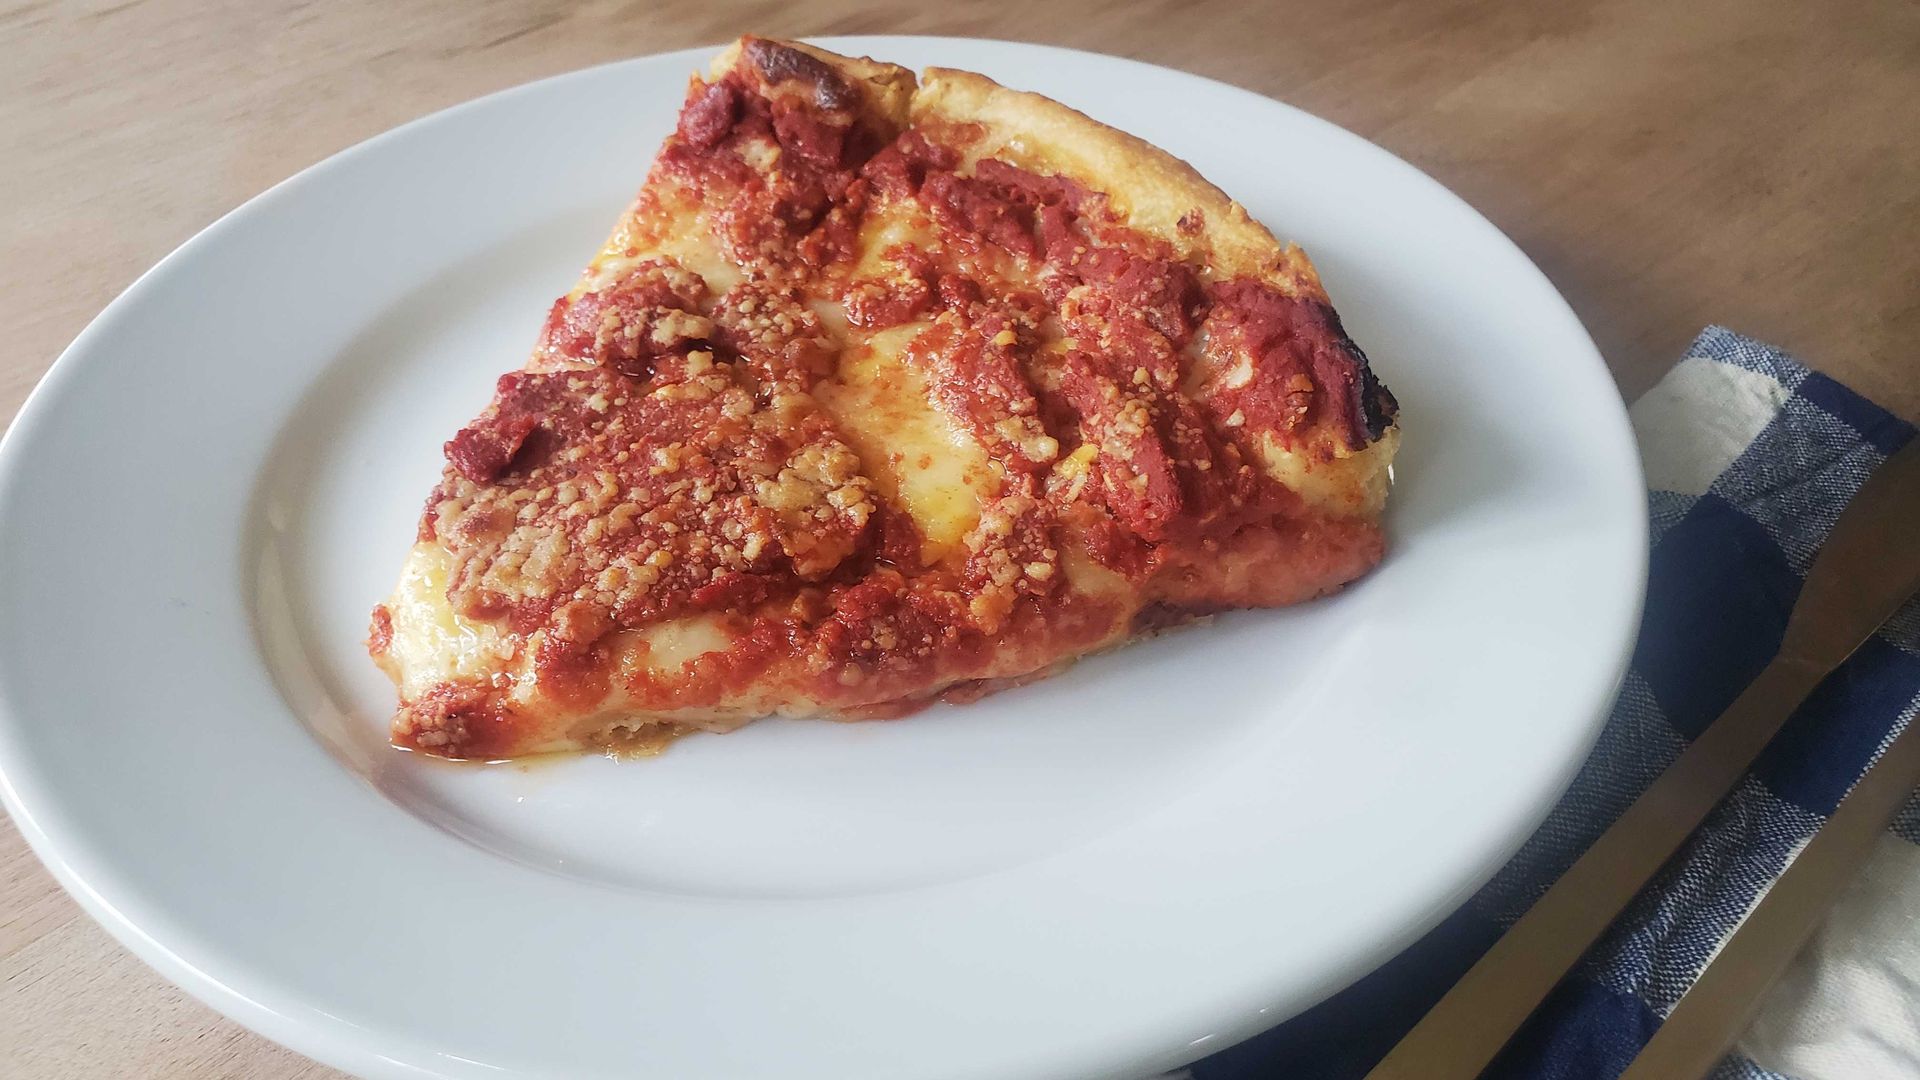 A piece of chicago-style deep dish pizza.